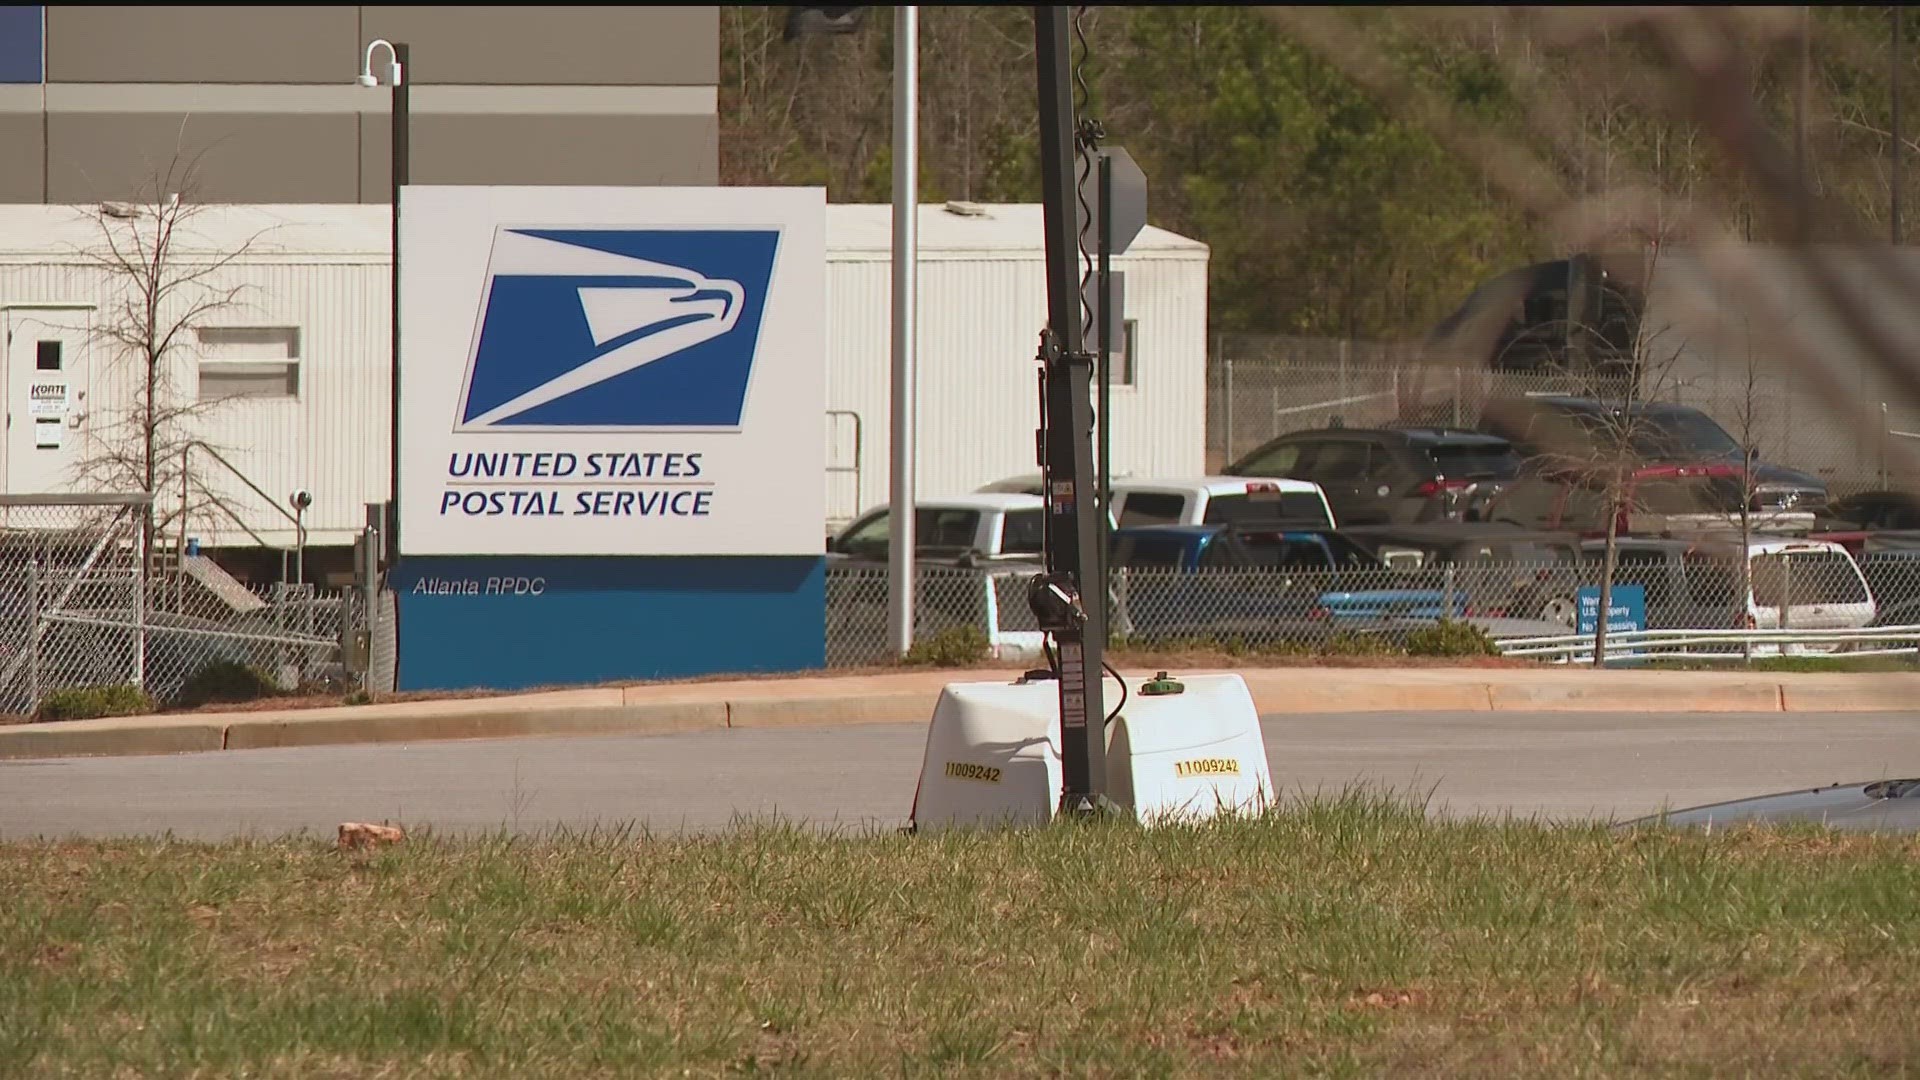 The U.S. Senate Homeland Security and Governmental Affairs Committee will hold a hearing Tuesday focused on USPS oversight.